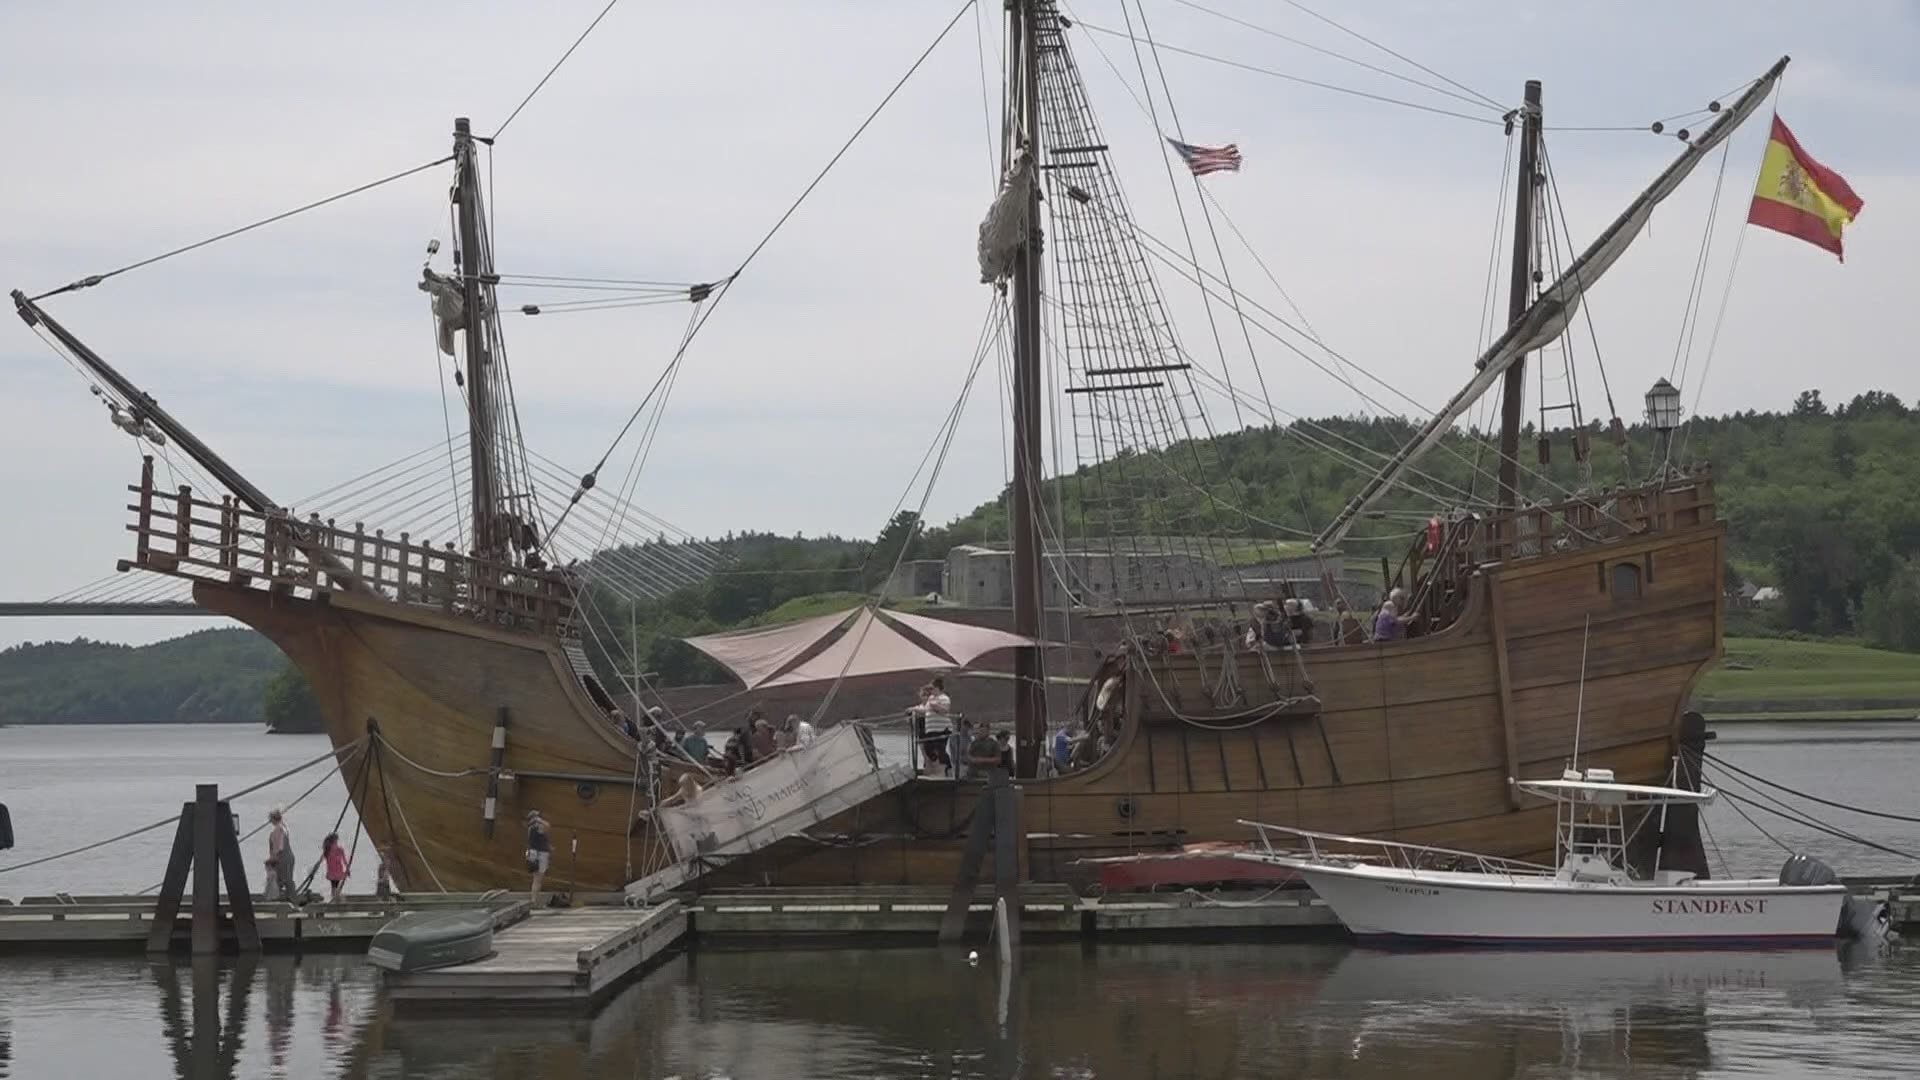 The boat was initially scheduled to leave the state a week from this Sunday, now it will leave when it's docking permit expires on Tuesday, July 13th.